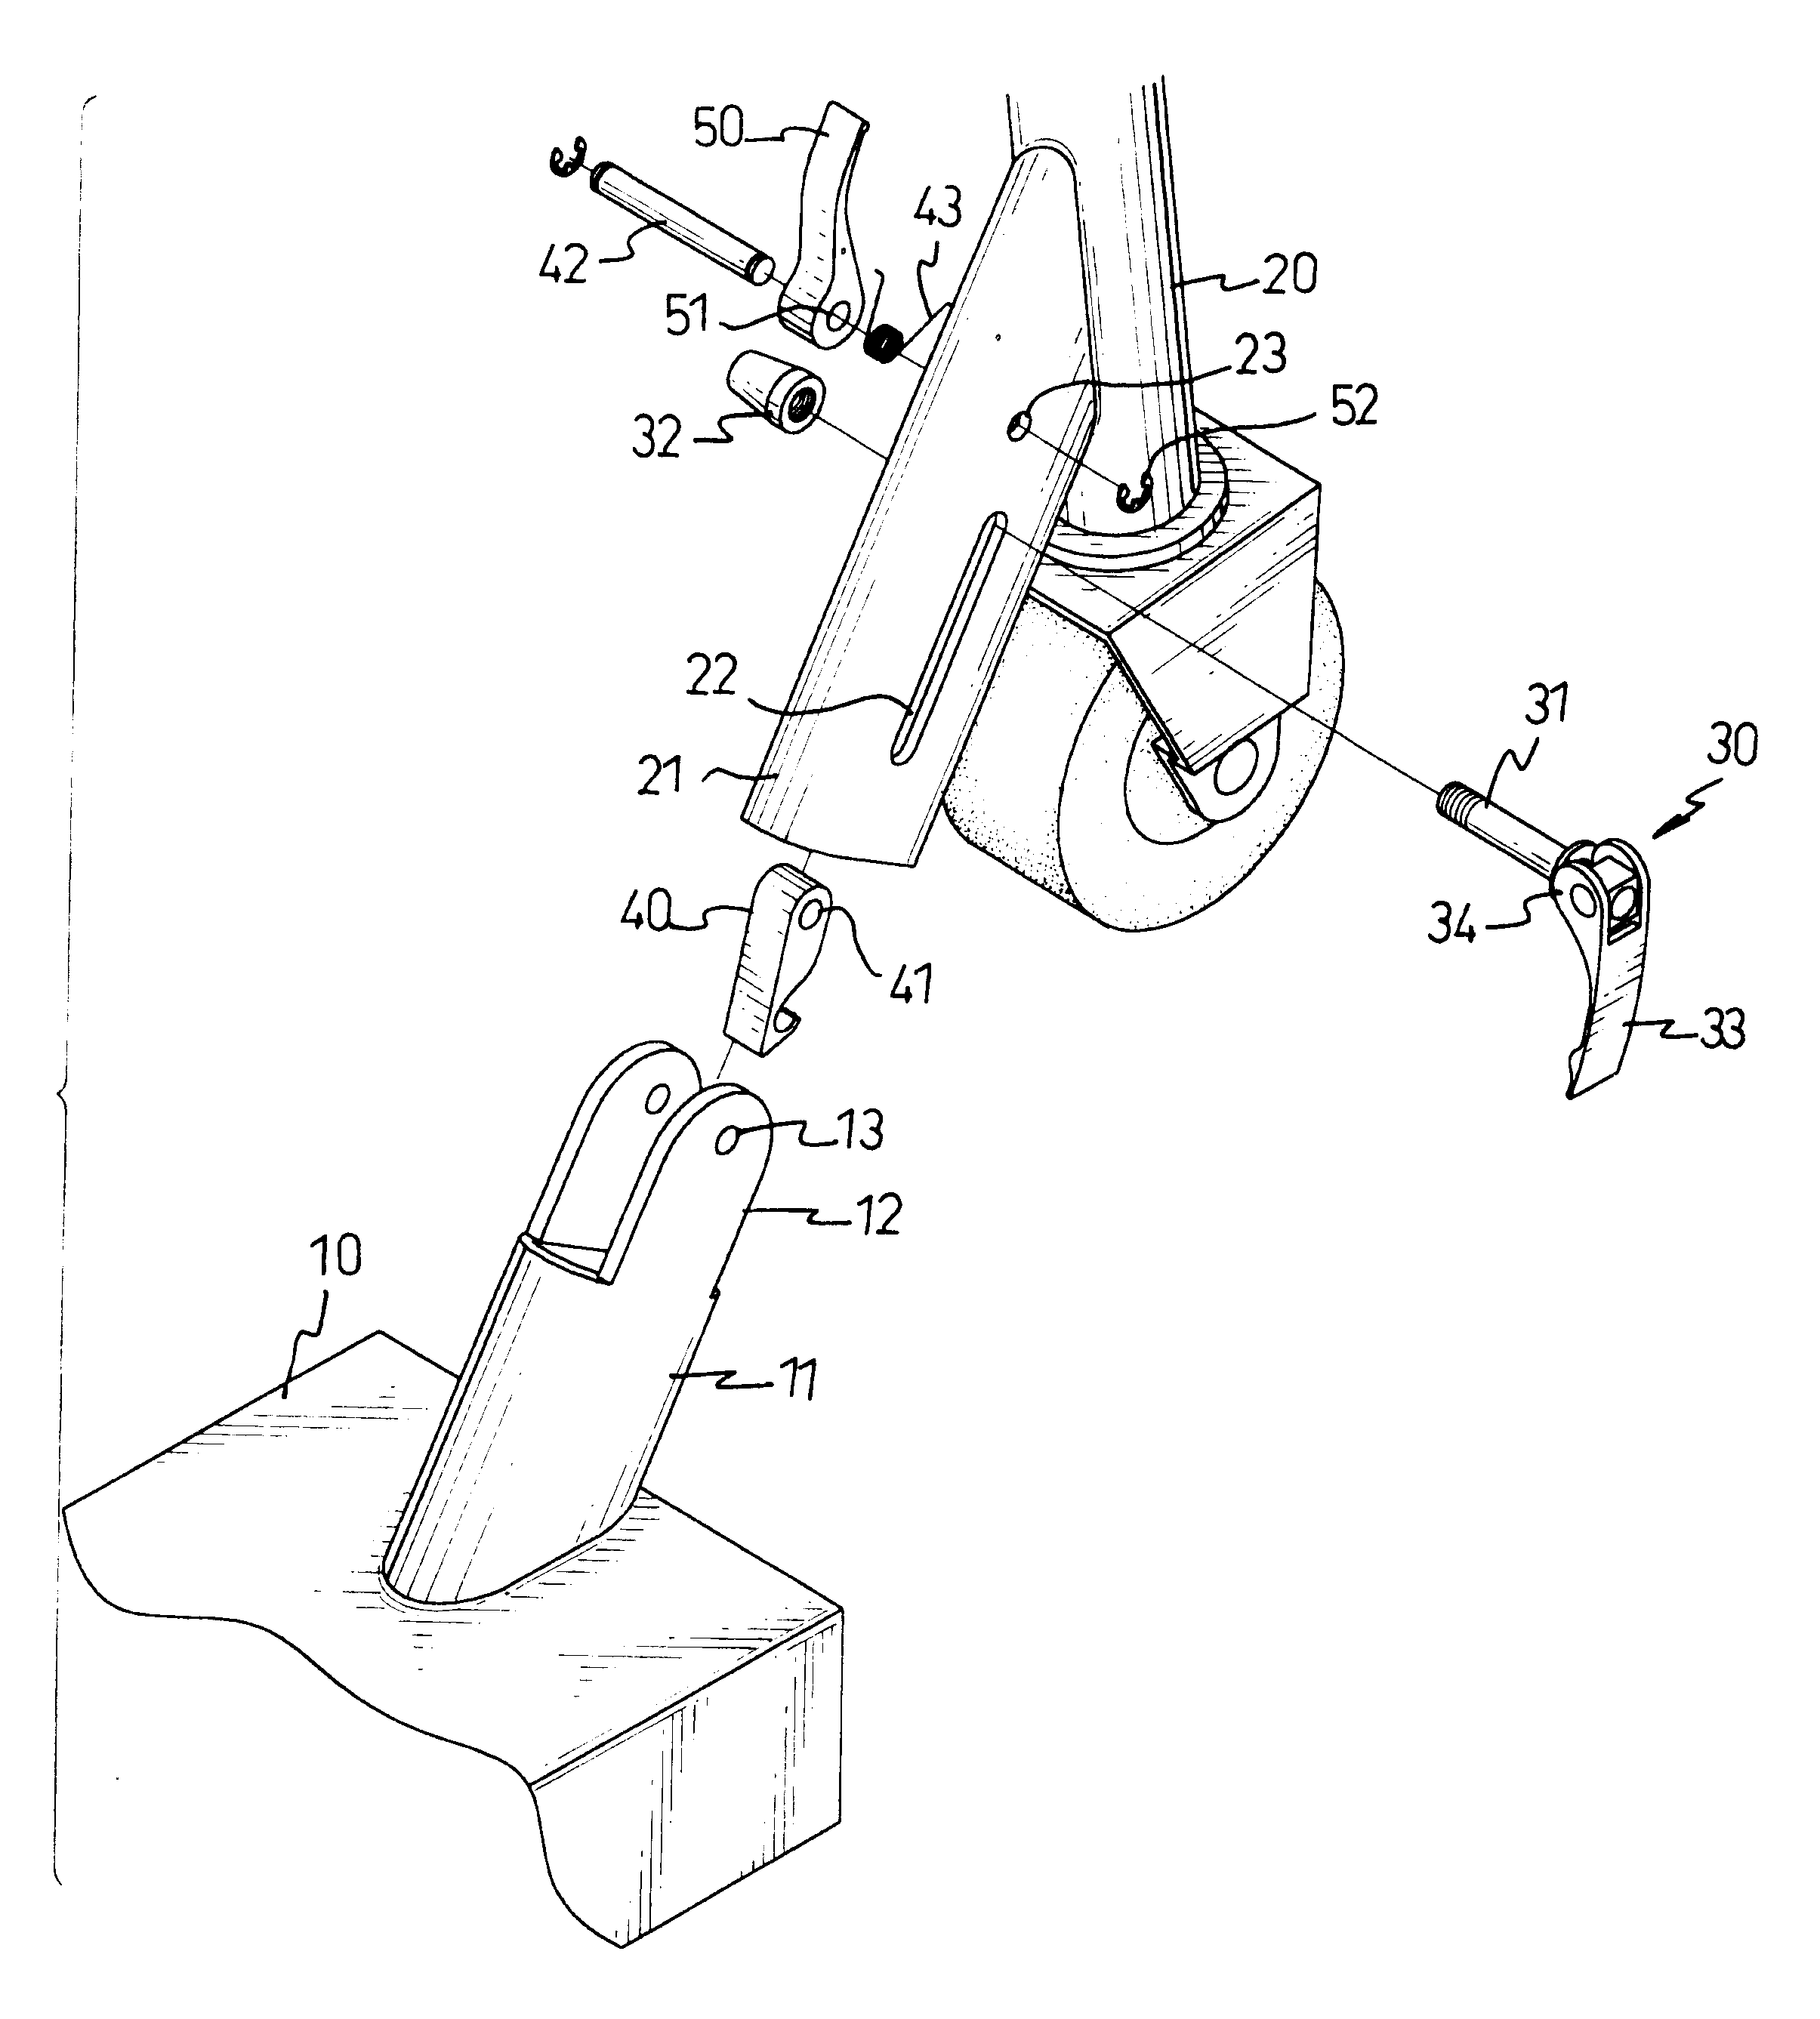 Folding device for a scooter